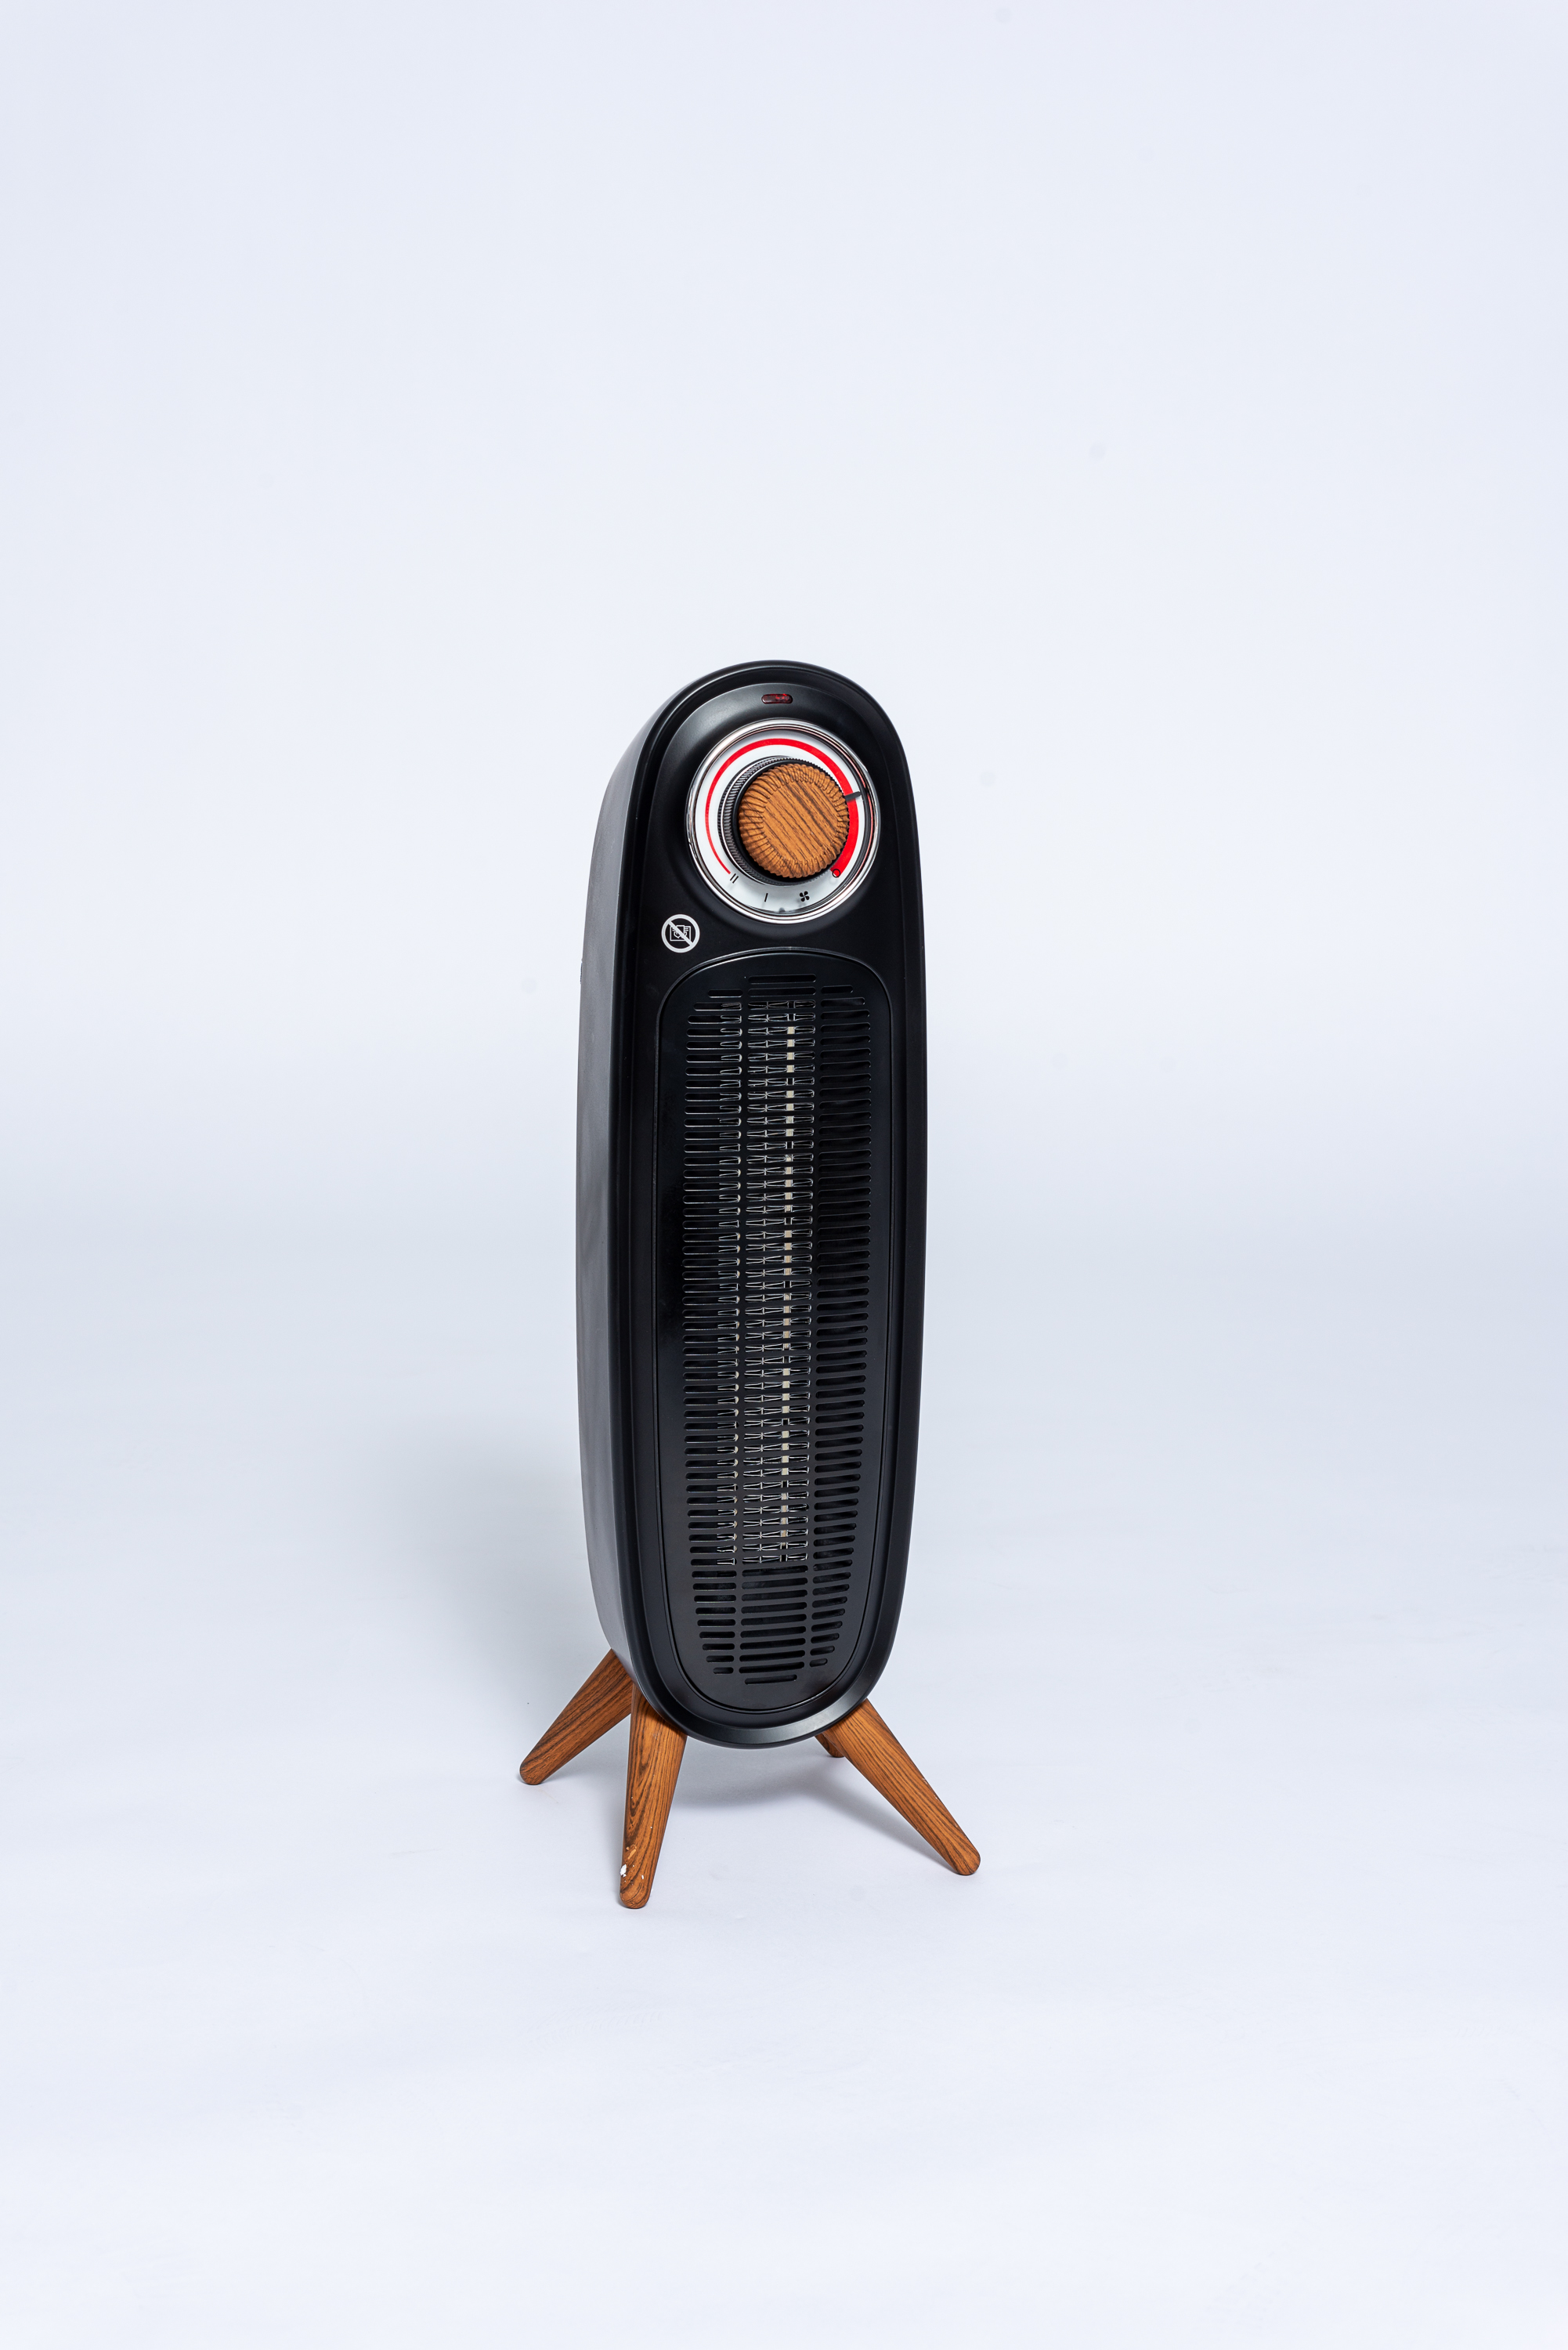 The Russell Hobbs portable hot & cool fan heater is just £49.99